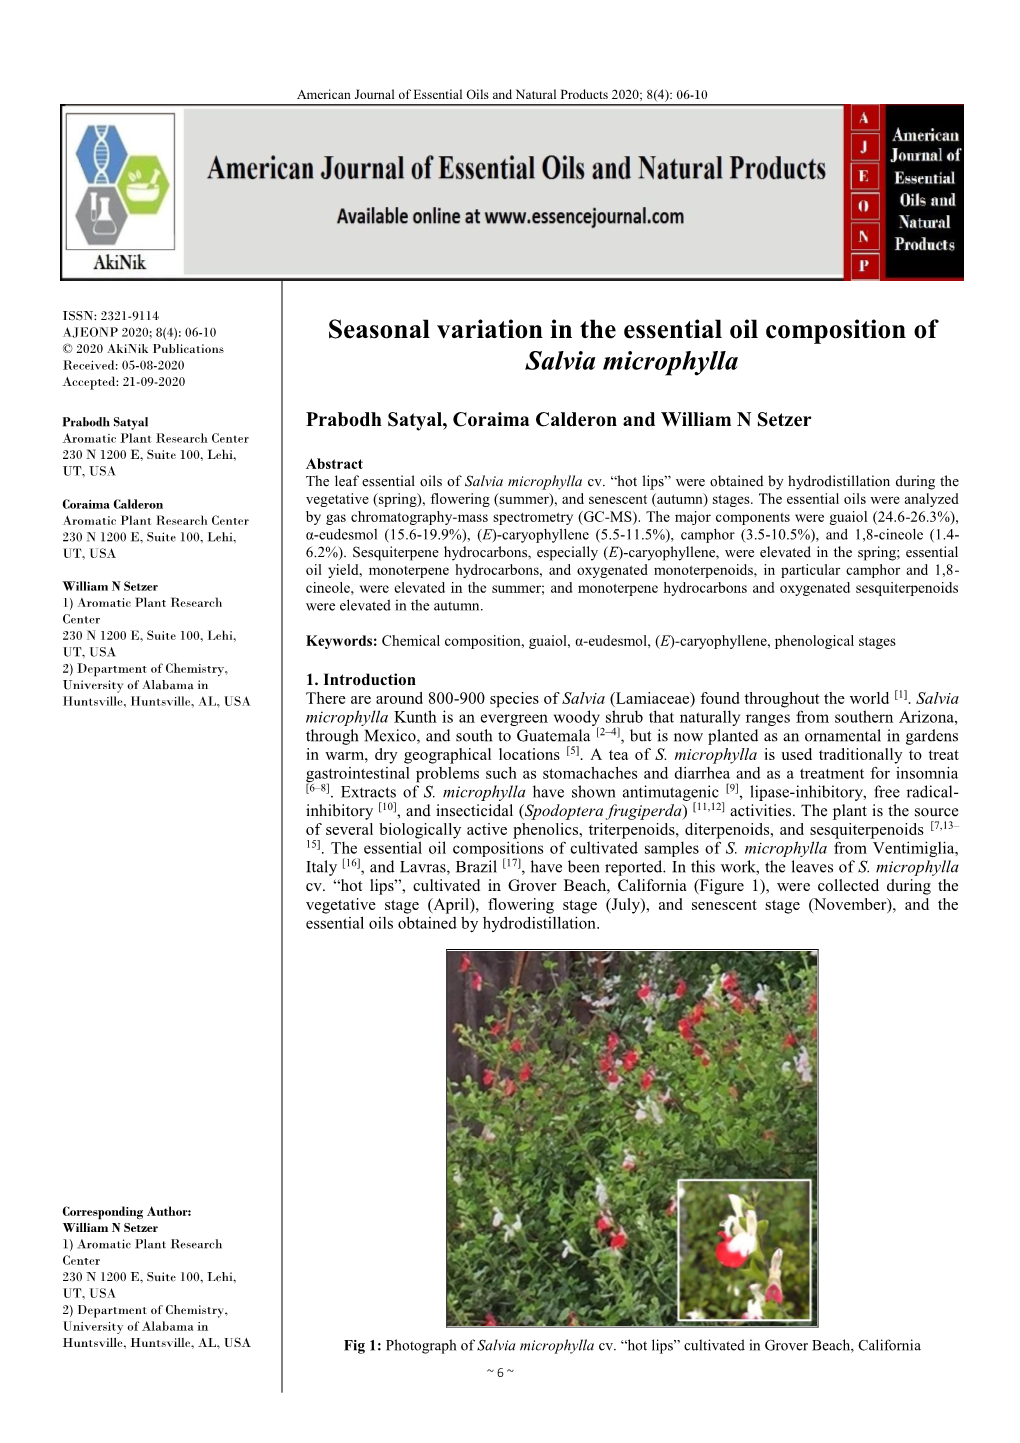 Seasonal Variation in the Essential Oil Composition of Salvia Microphylla